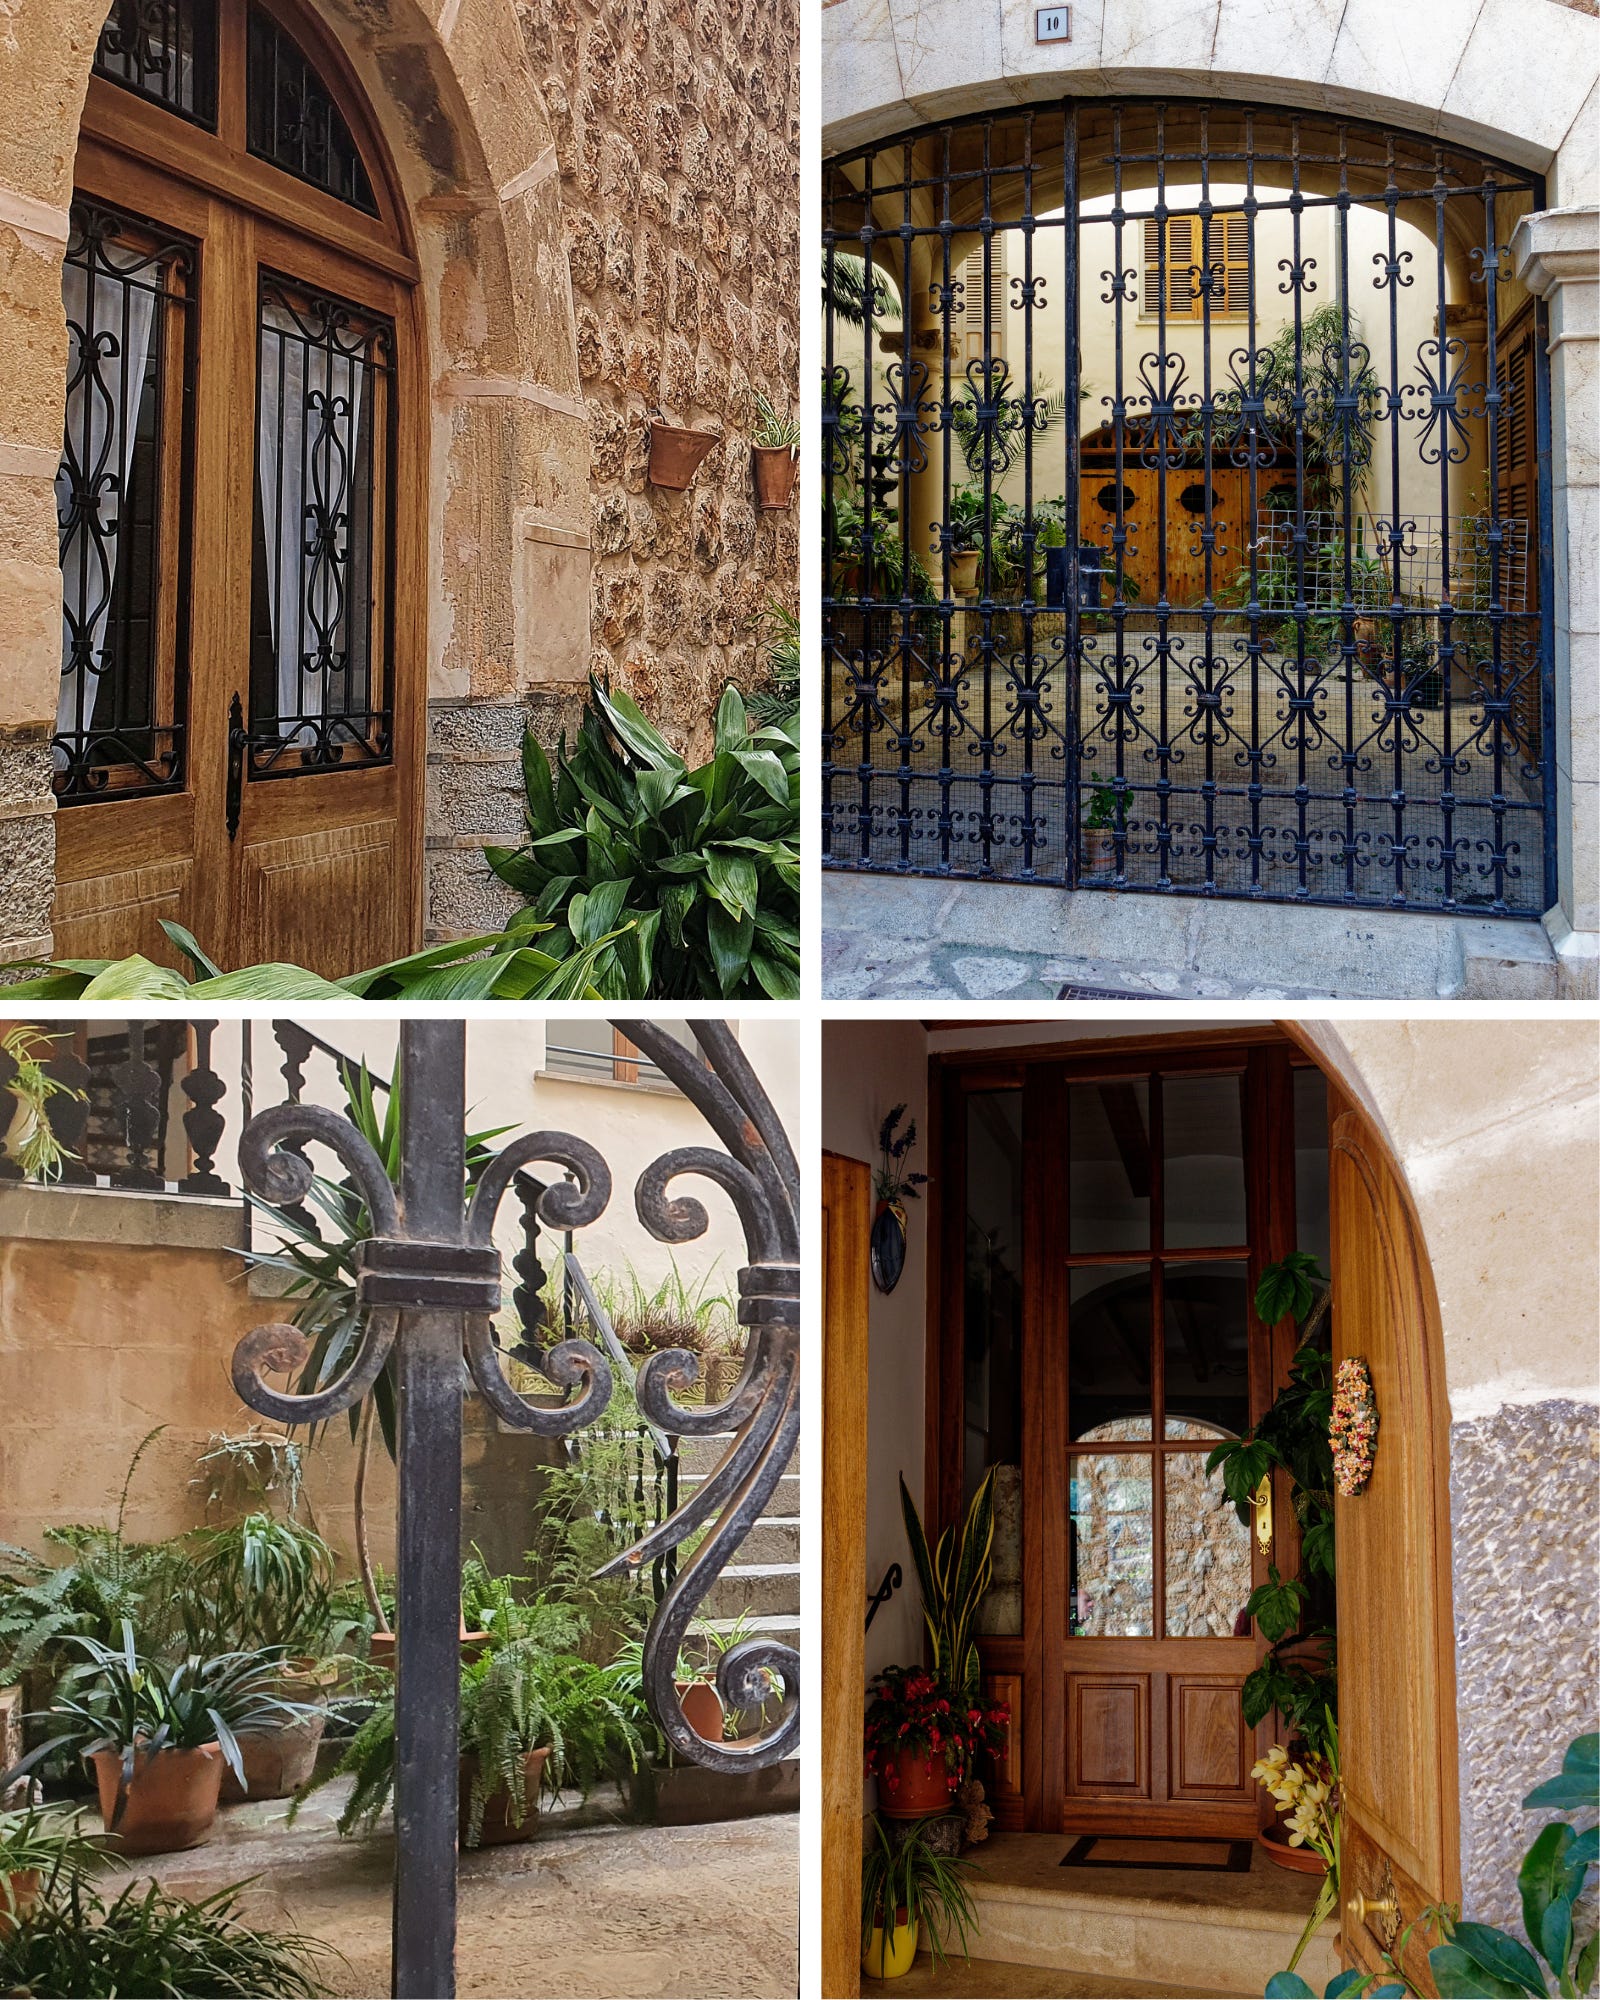 Four views of fascinating doorways in Fornalutx